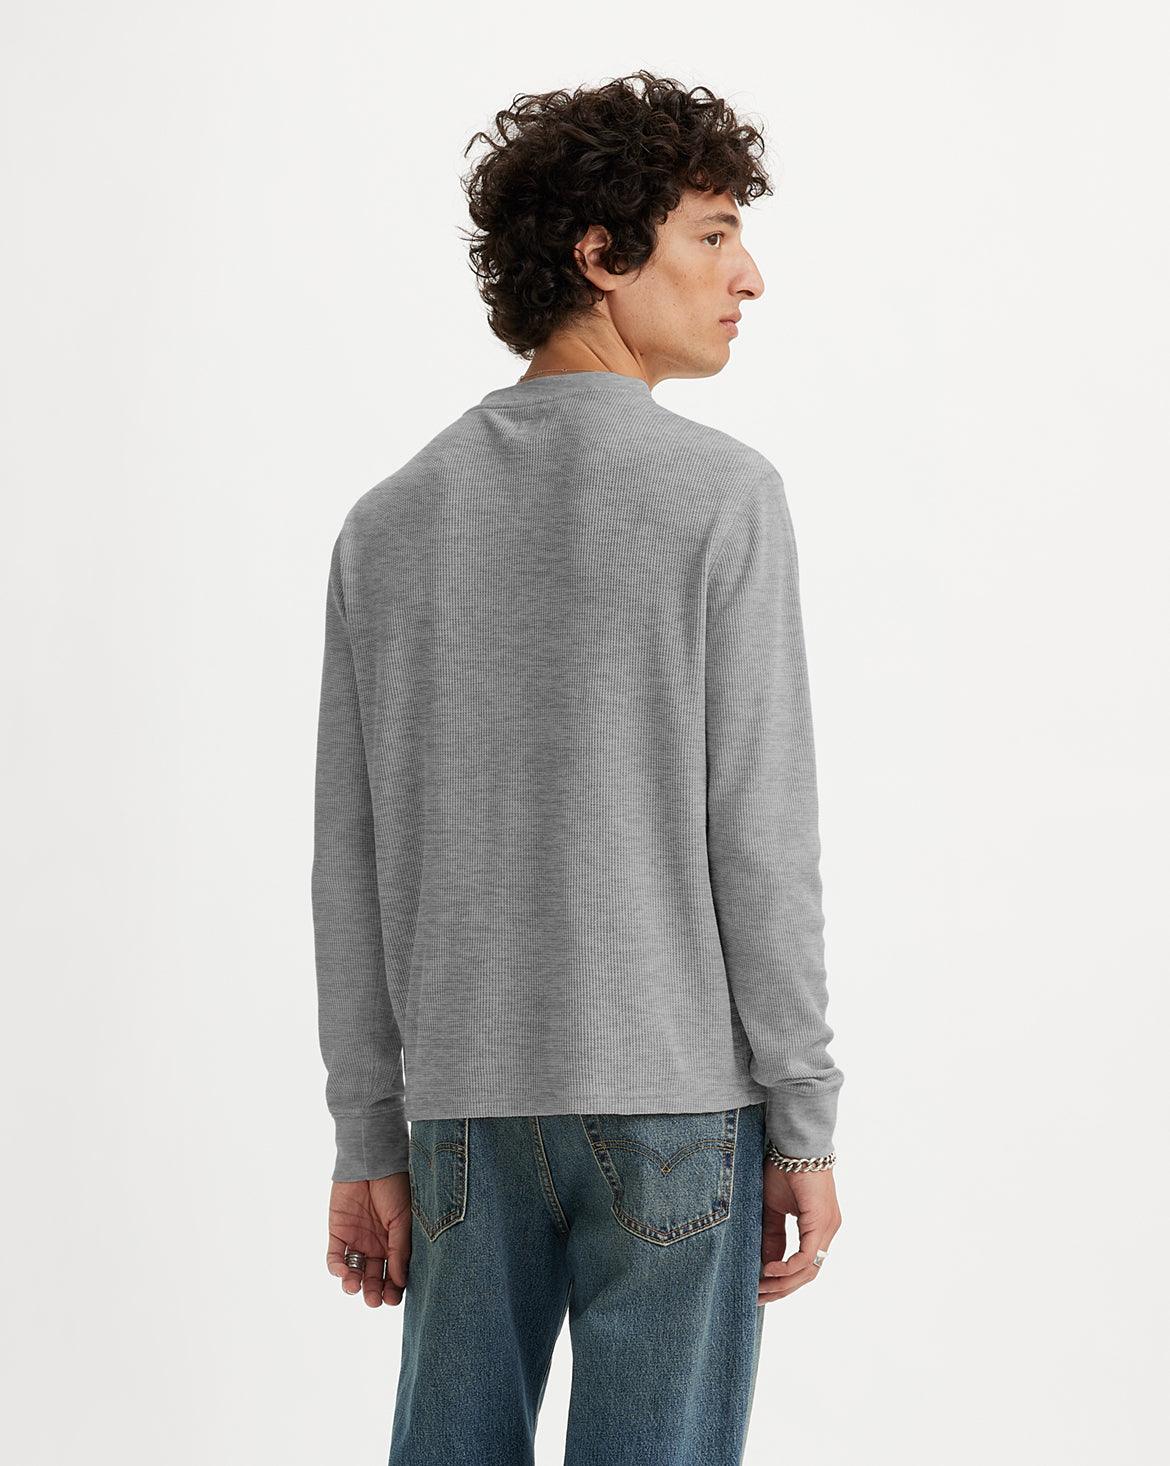 LONG-SLEEVE THERMAL HENLEY - NEUTRAL